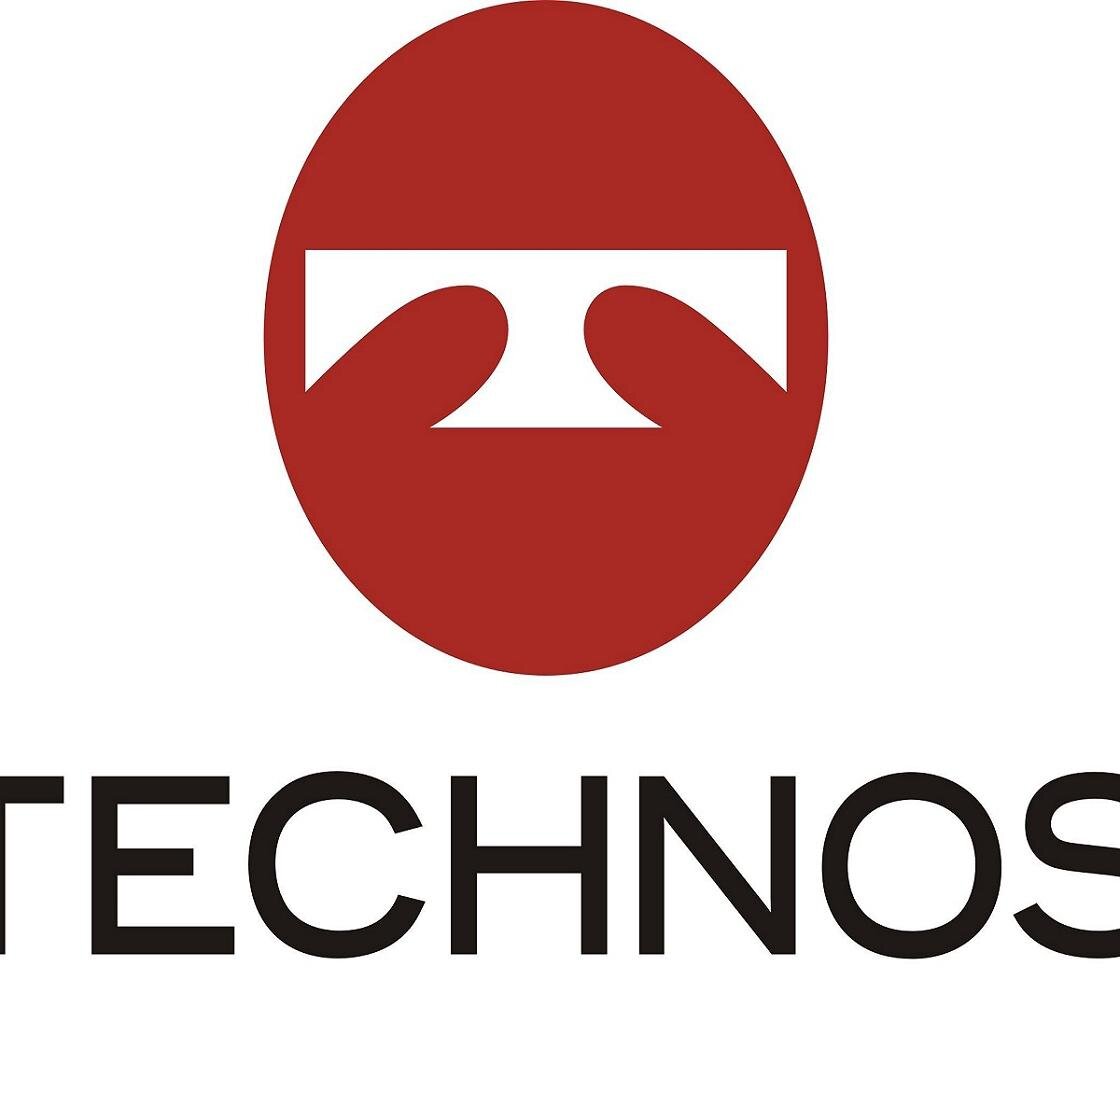 Technos Inc

is an organization that provides software, Embedded, VLSI development and customizations to meet your company's industry specific needs. We consist